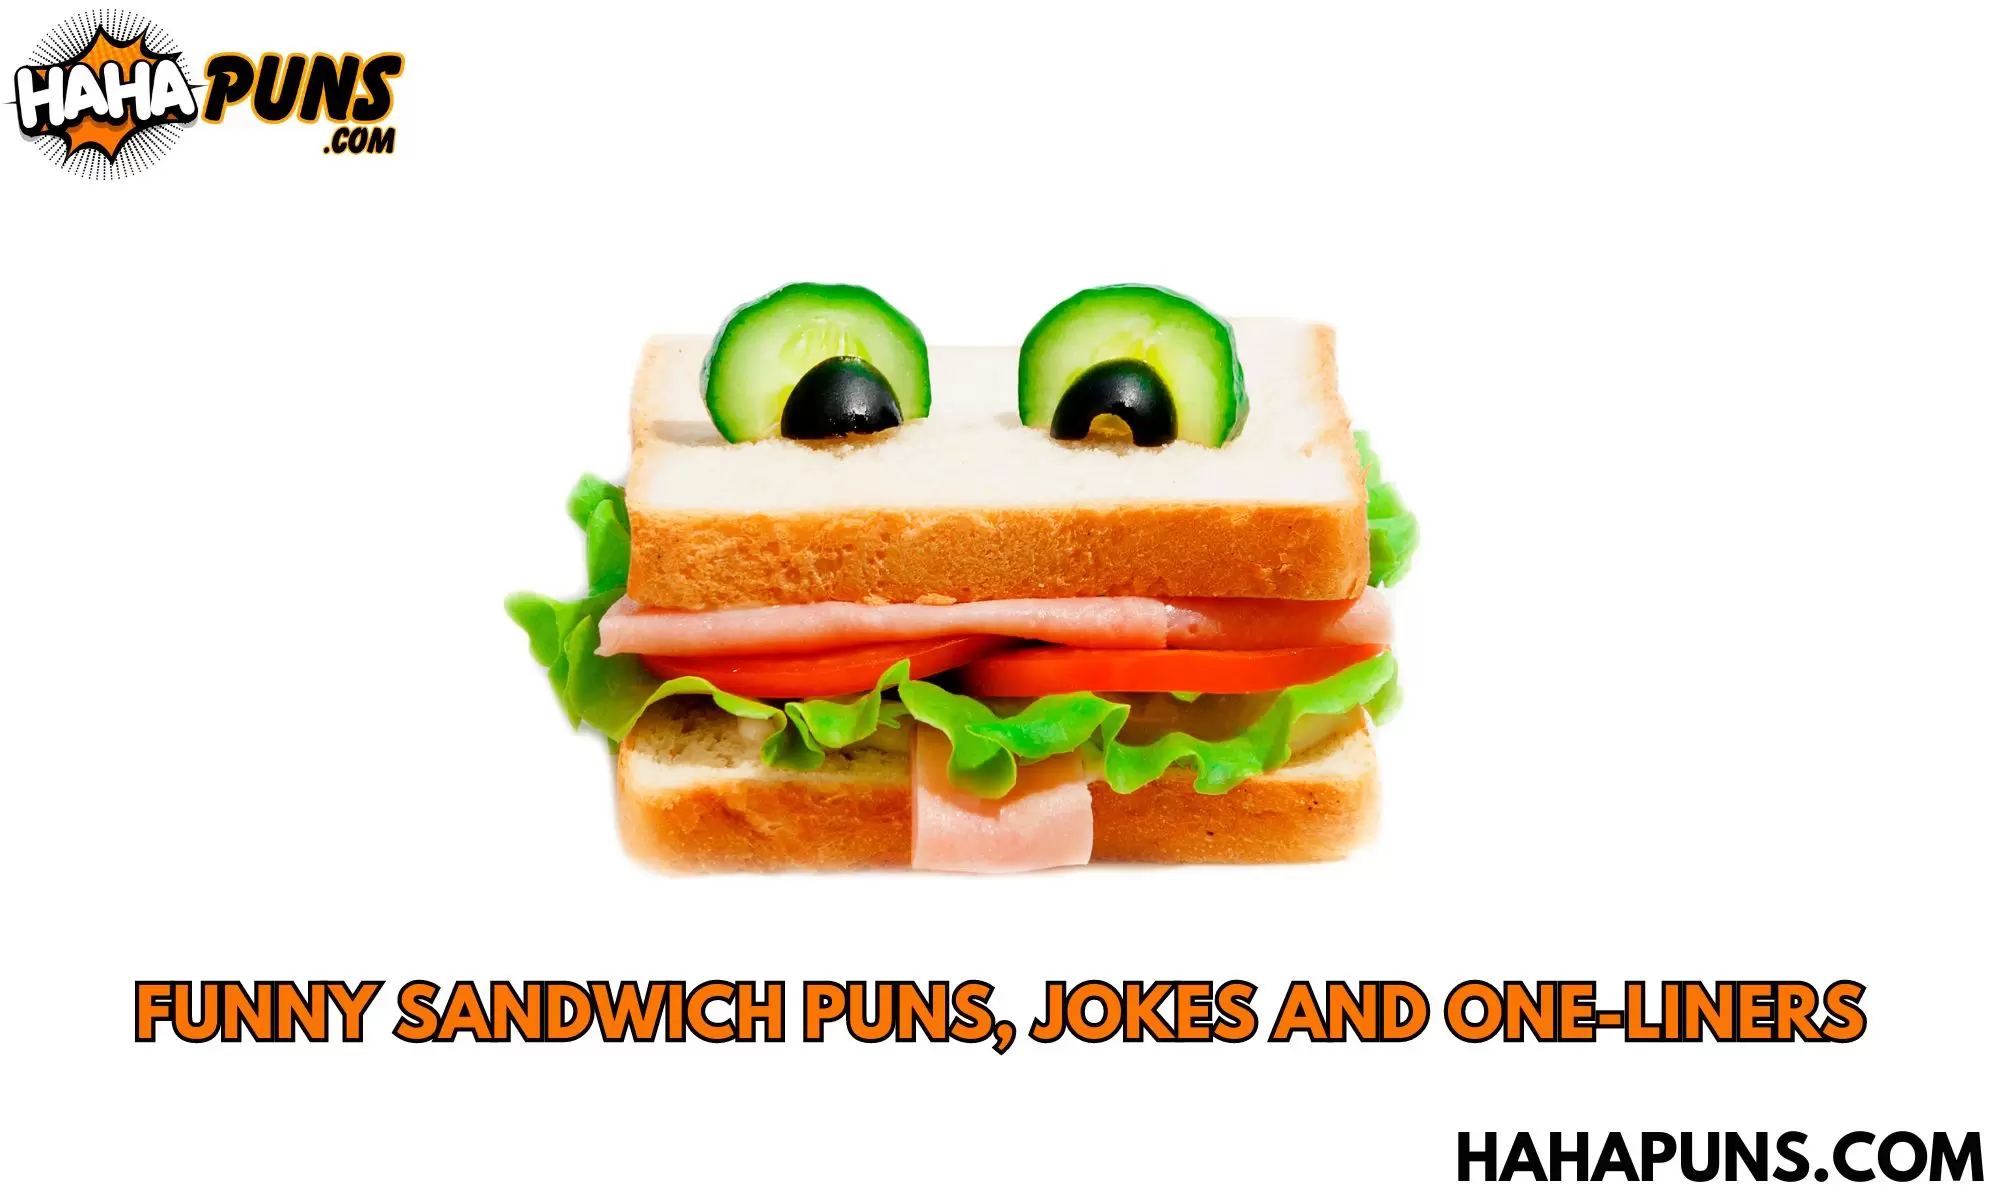 Funny Sandwich Puns, Jokes And One-Liners